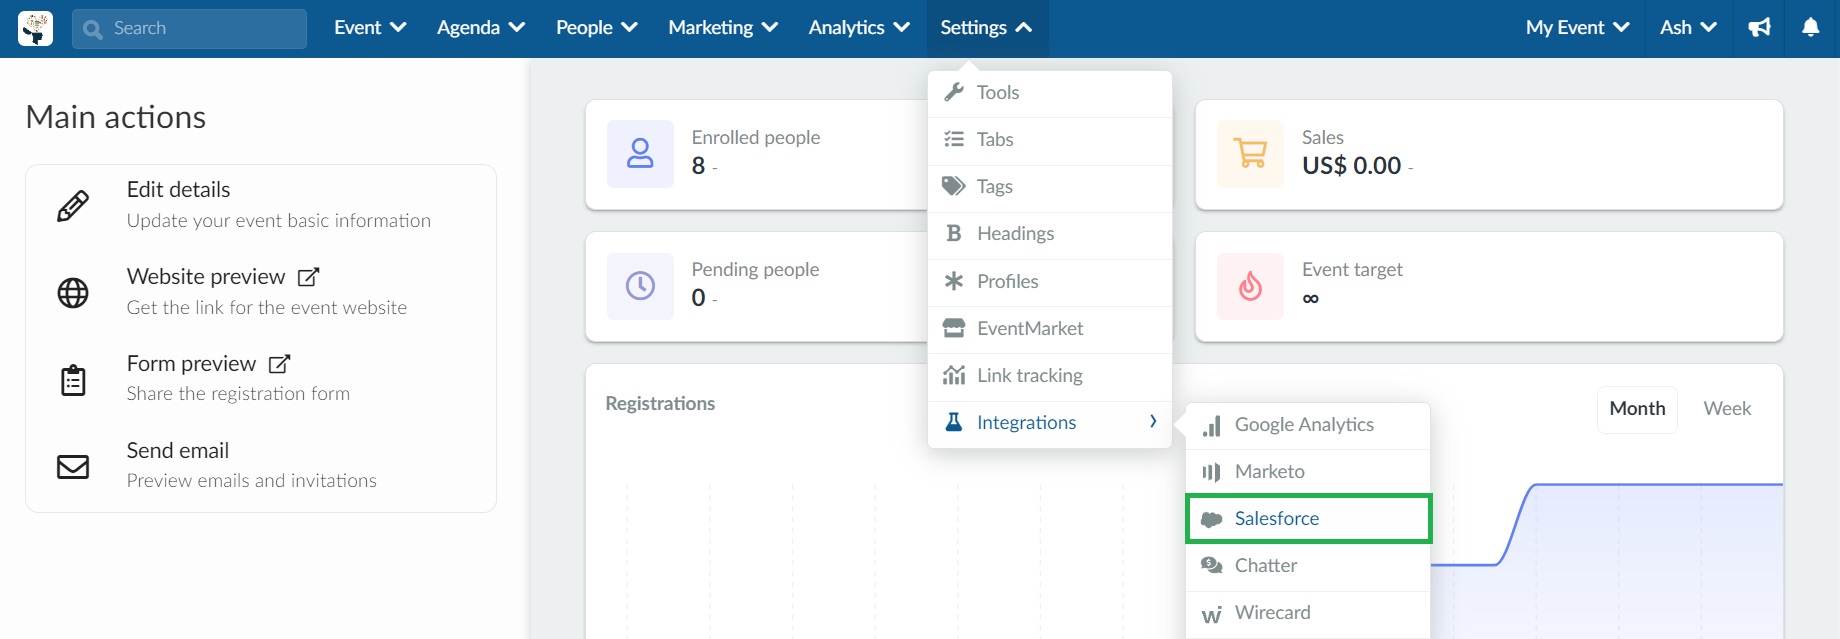 How to access the salesforce integration at event level